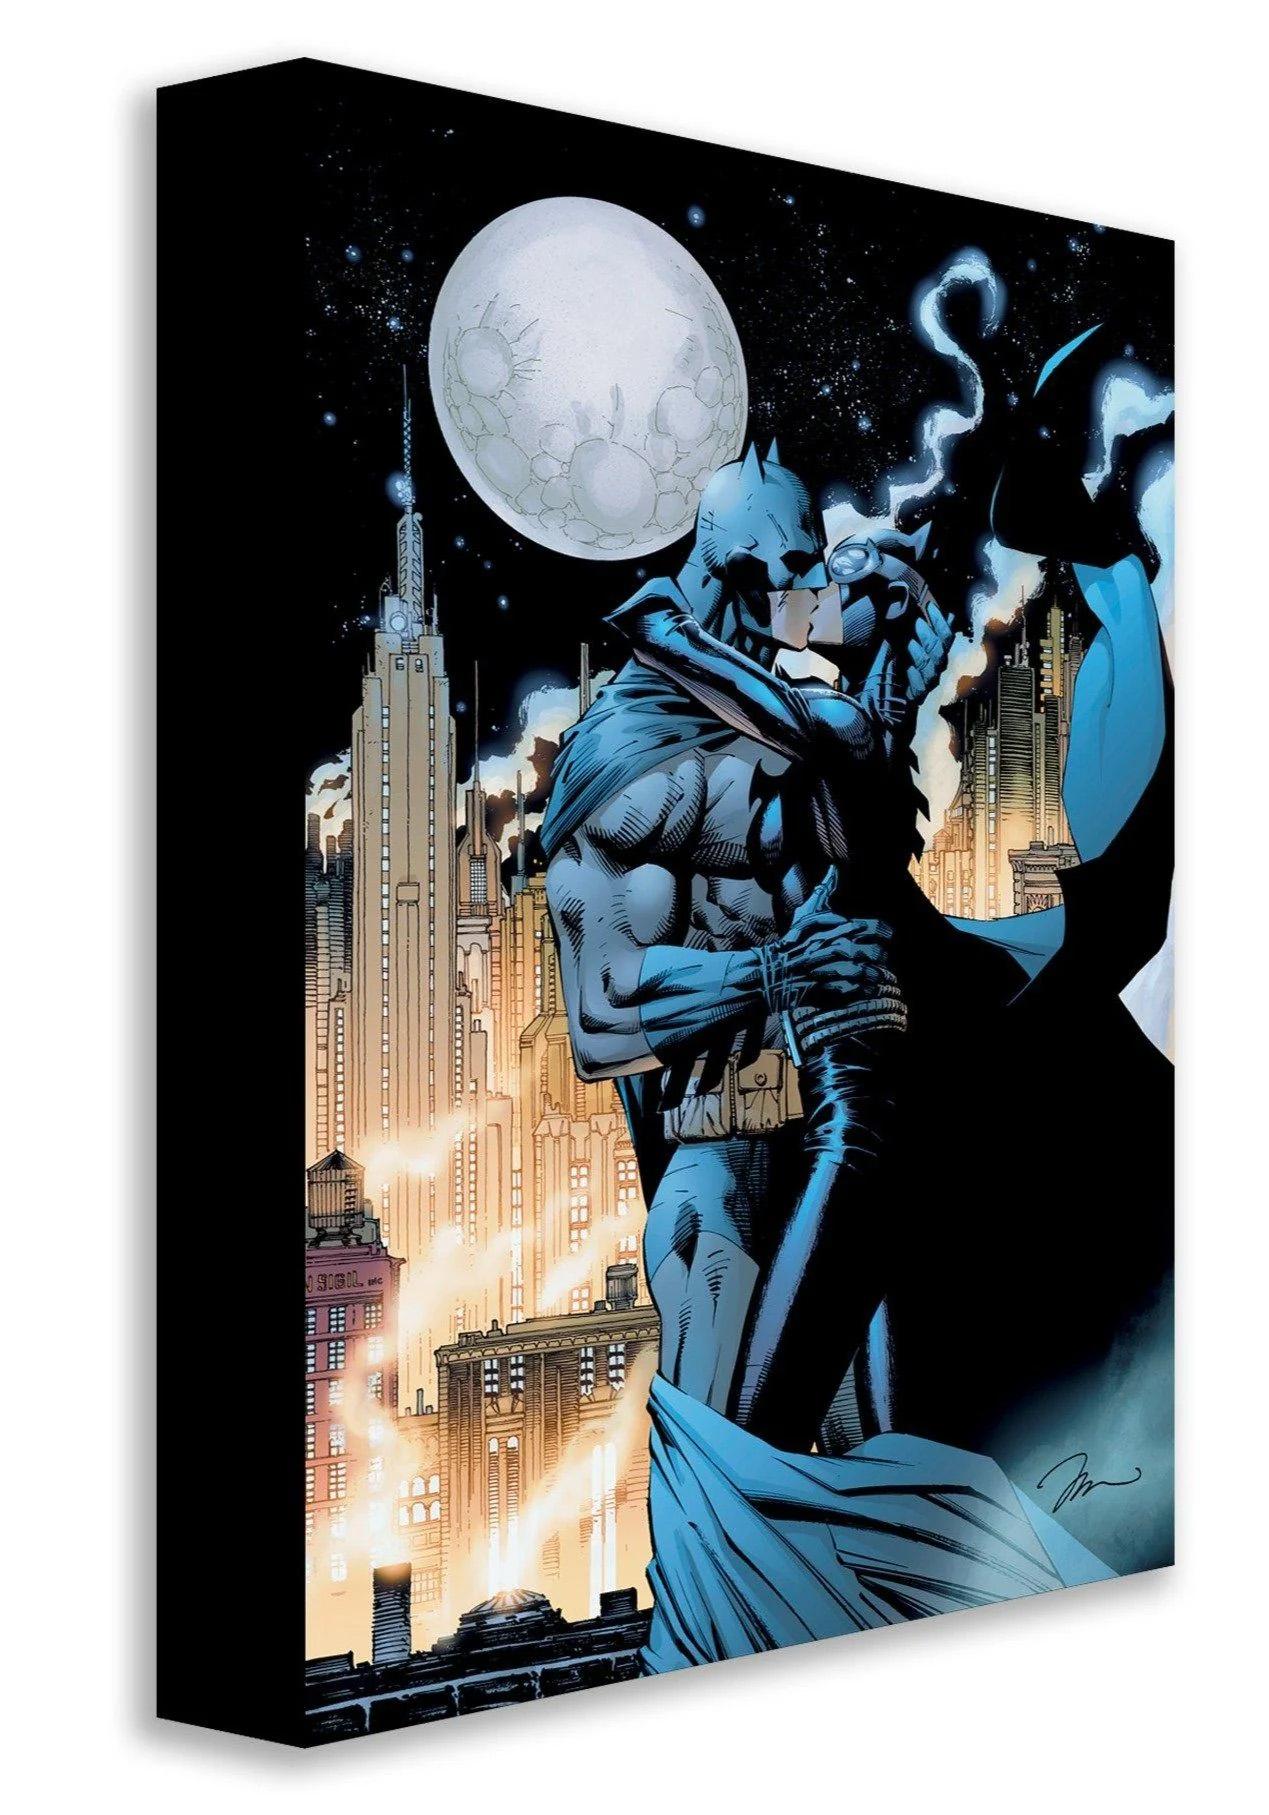 Mighty Mini Collection: Kissing the Knight - Pop Art Print by Jim Lee